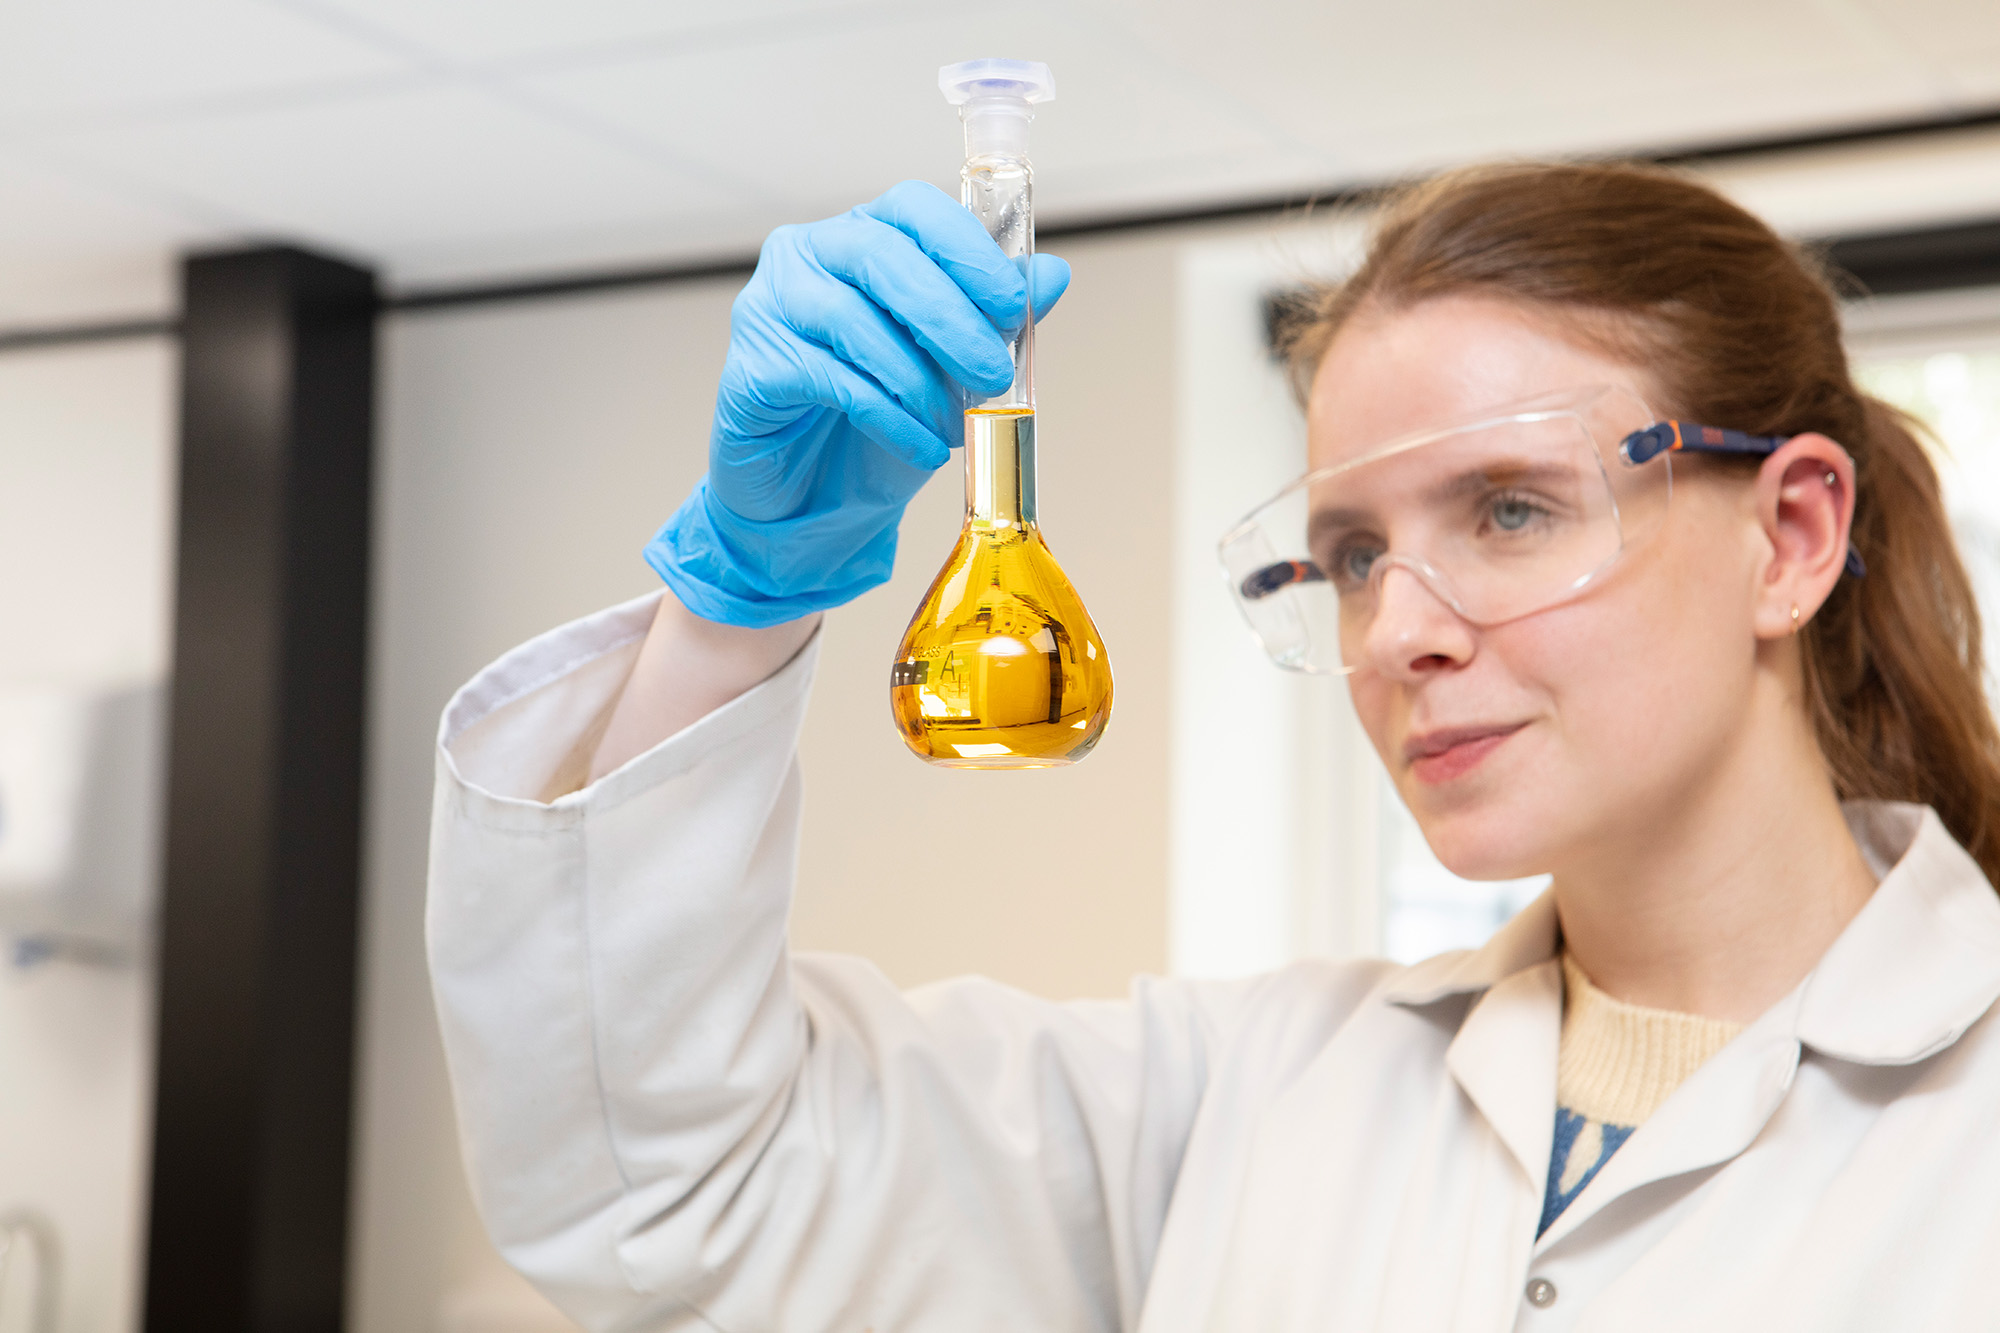 Female Scientist wearing lab coat holding glass vile containing clear yellow orange liquid, a reflect of the room can be seen in the glass.